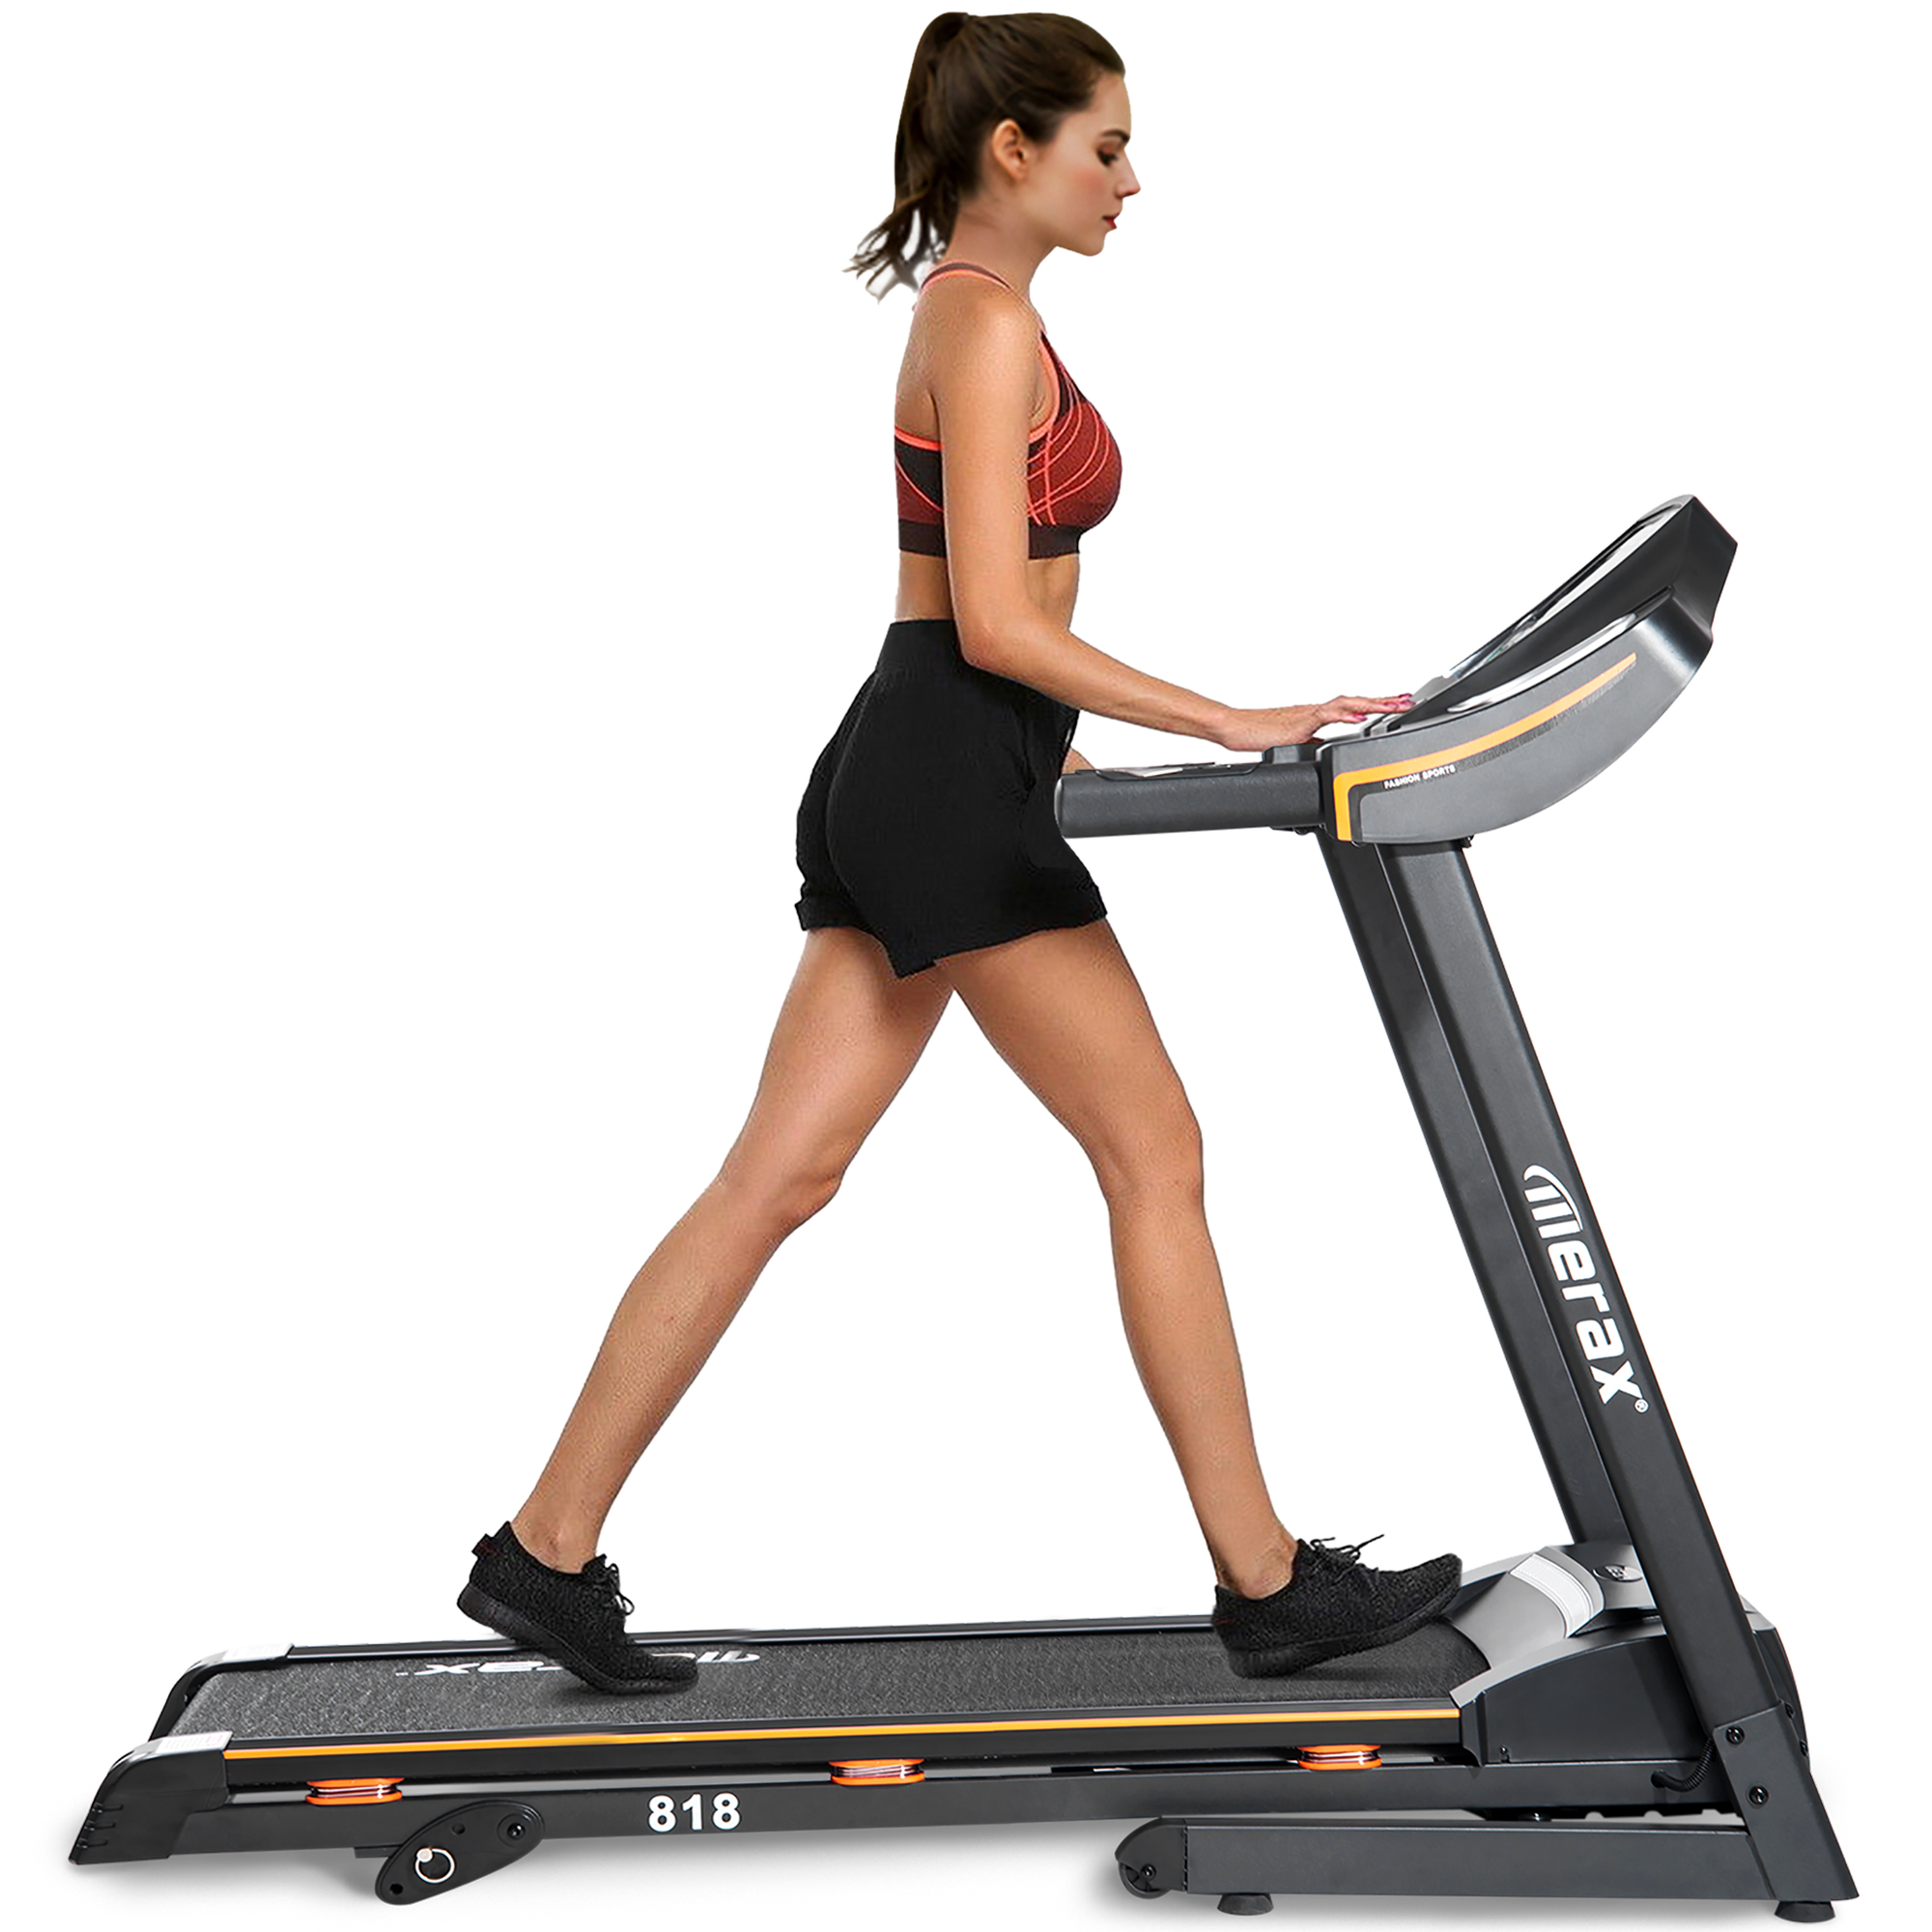 Why A Person Should Plan To Place The Space Saving Treadmills?